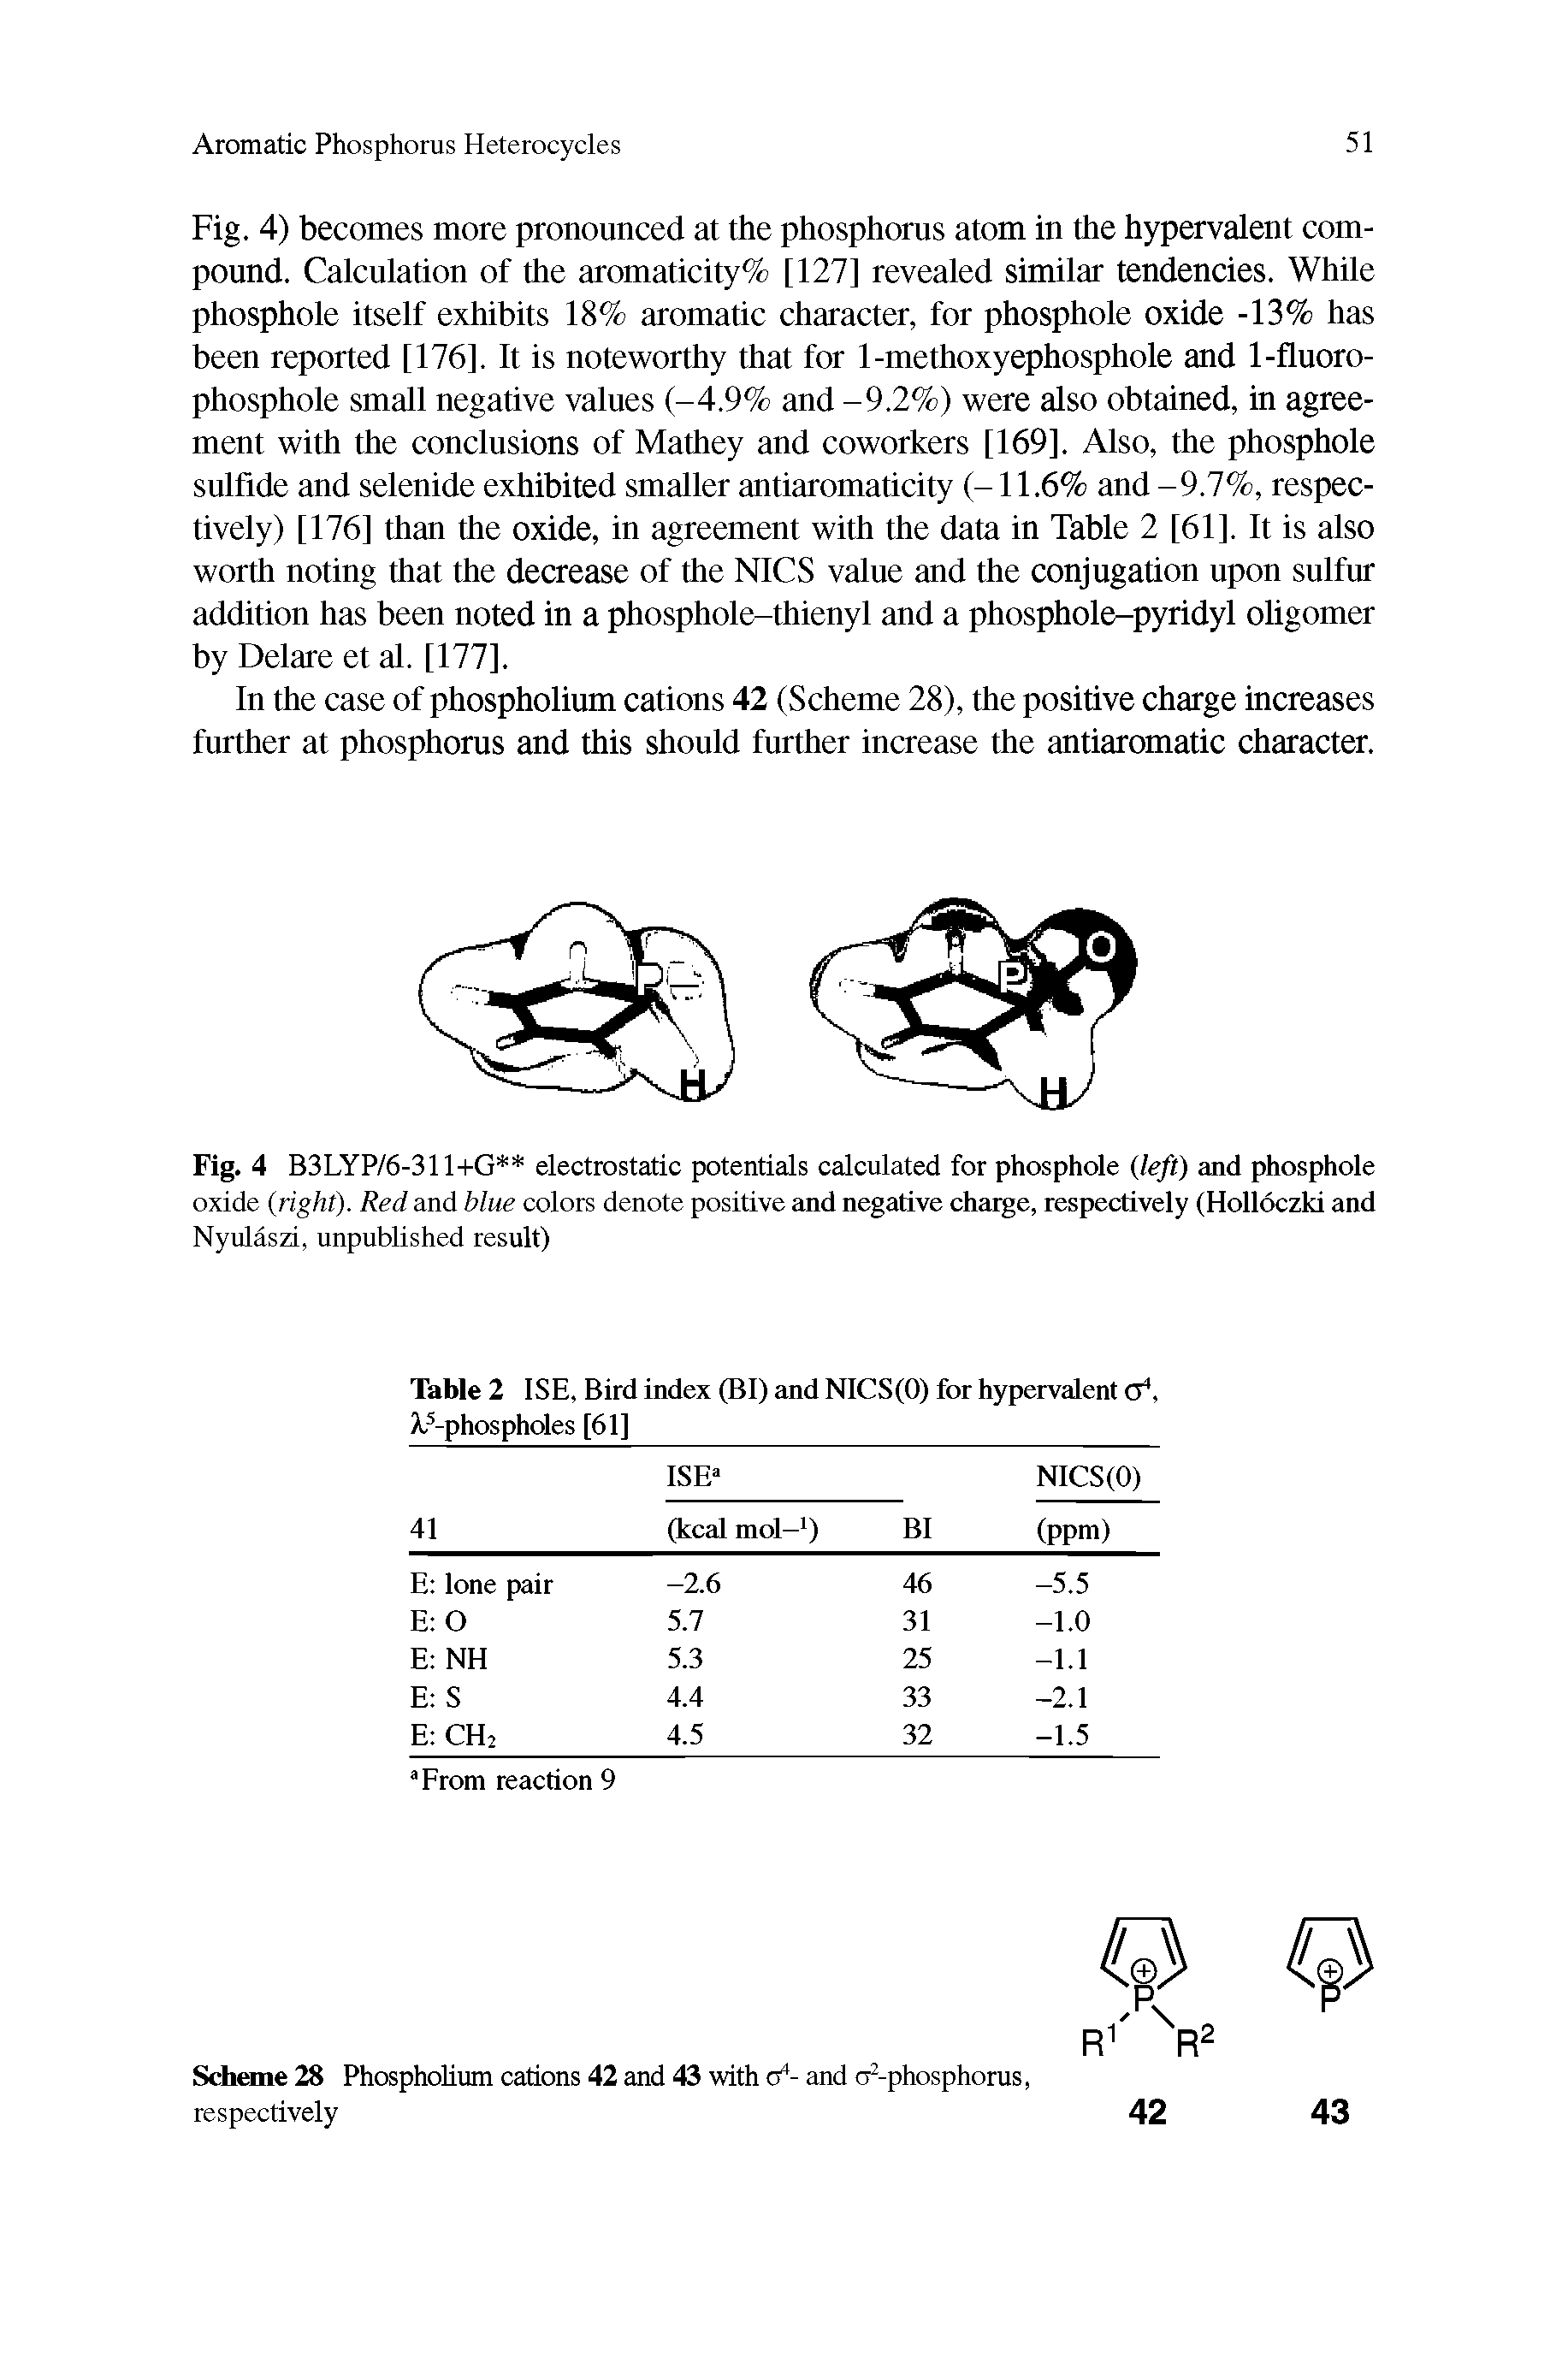 Table 2 ISE, Bird index (BI) and NICS(O) for hypervalent cf, A.3-phospholes [61]...